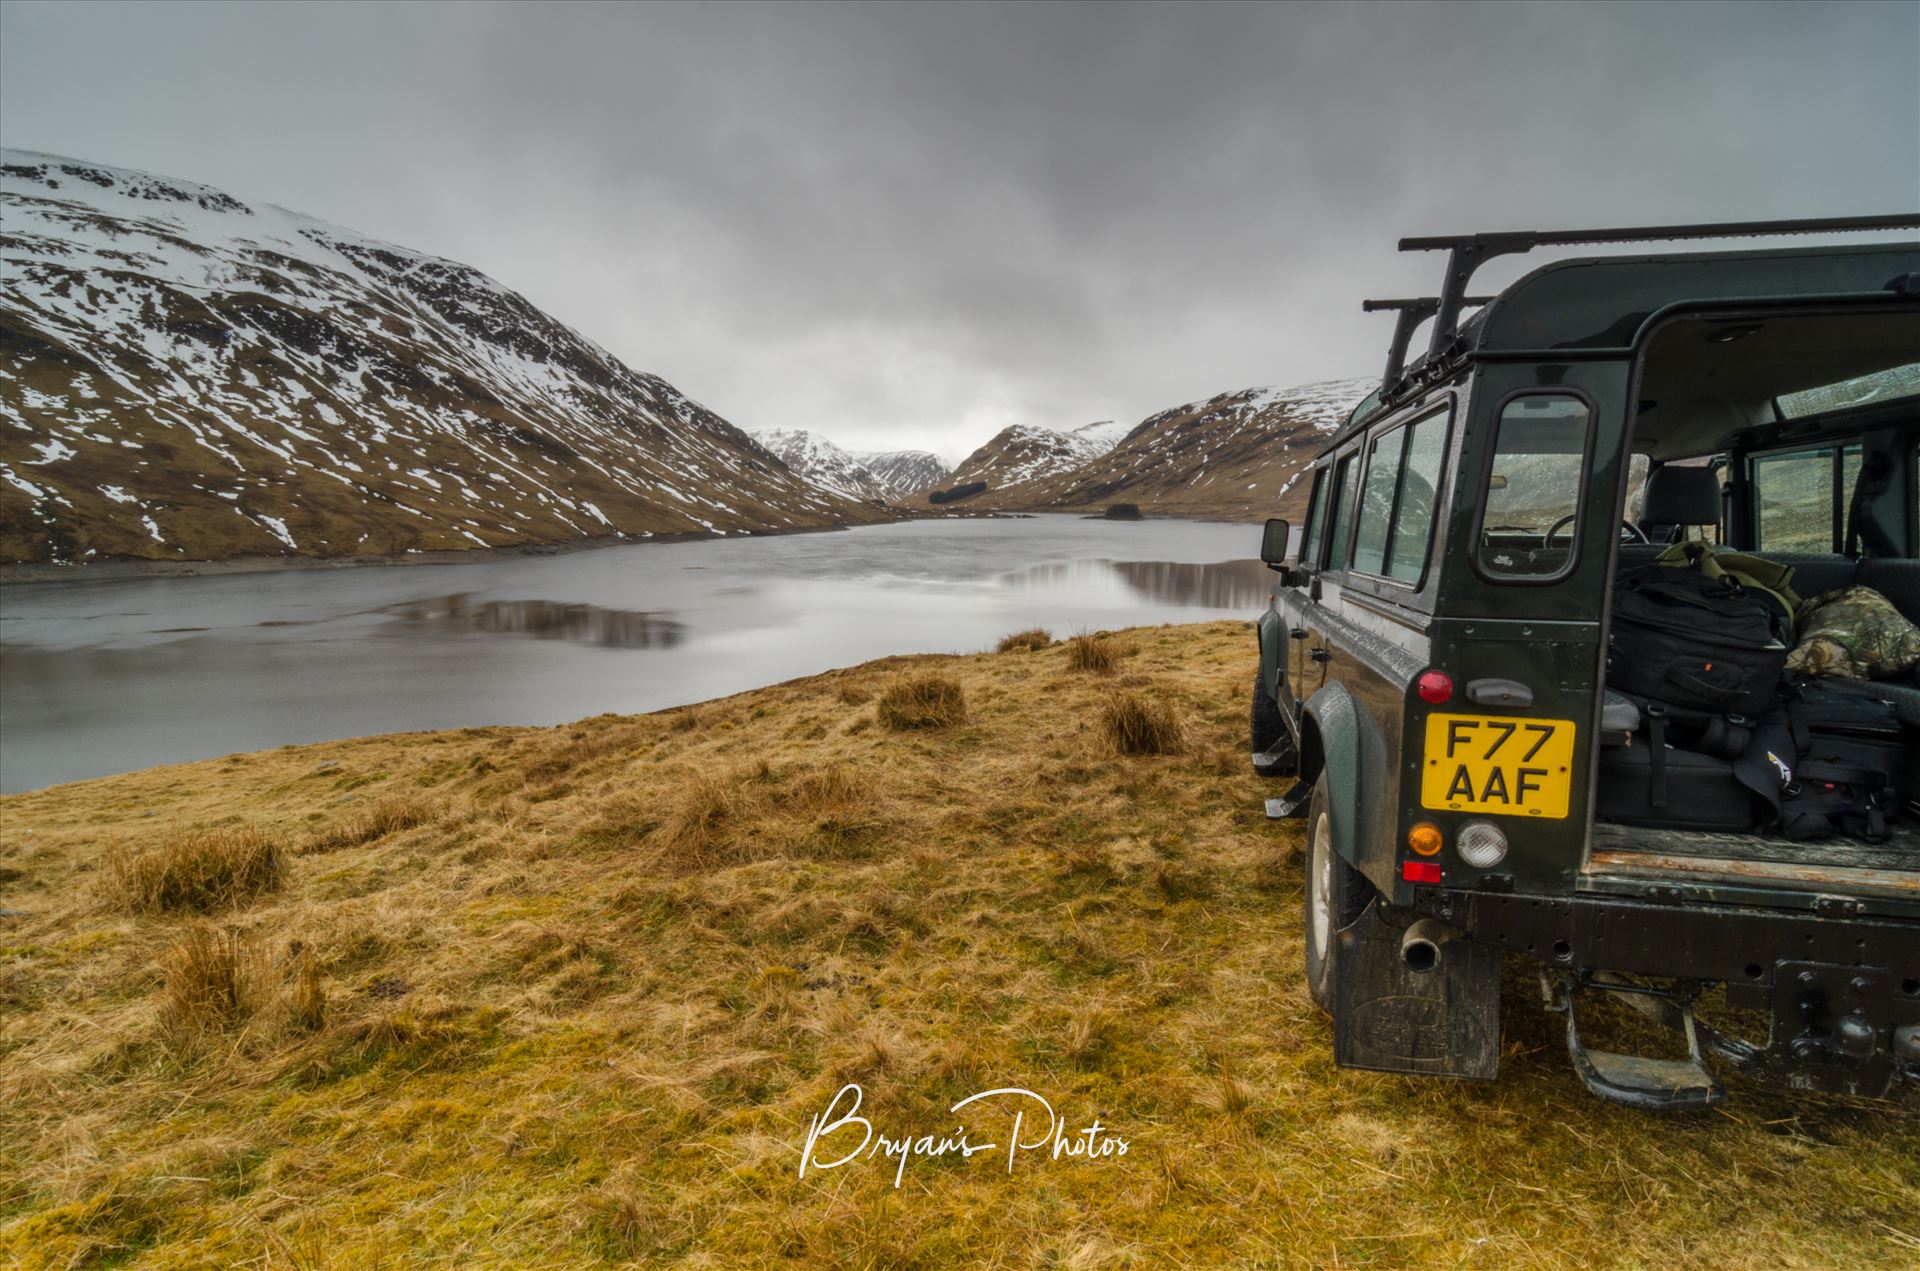 Glen Lyon Reservoir A photograph of the Glen Lyon Reservoir and the Land rover that took me there. by Bryans Photos